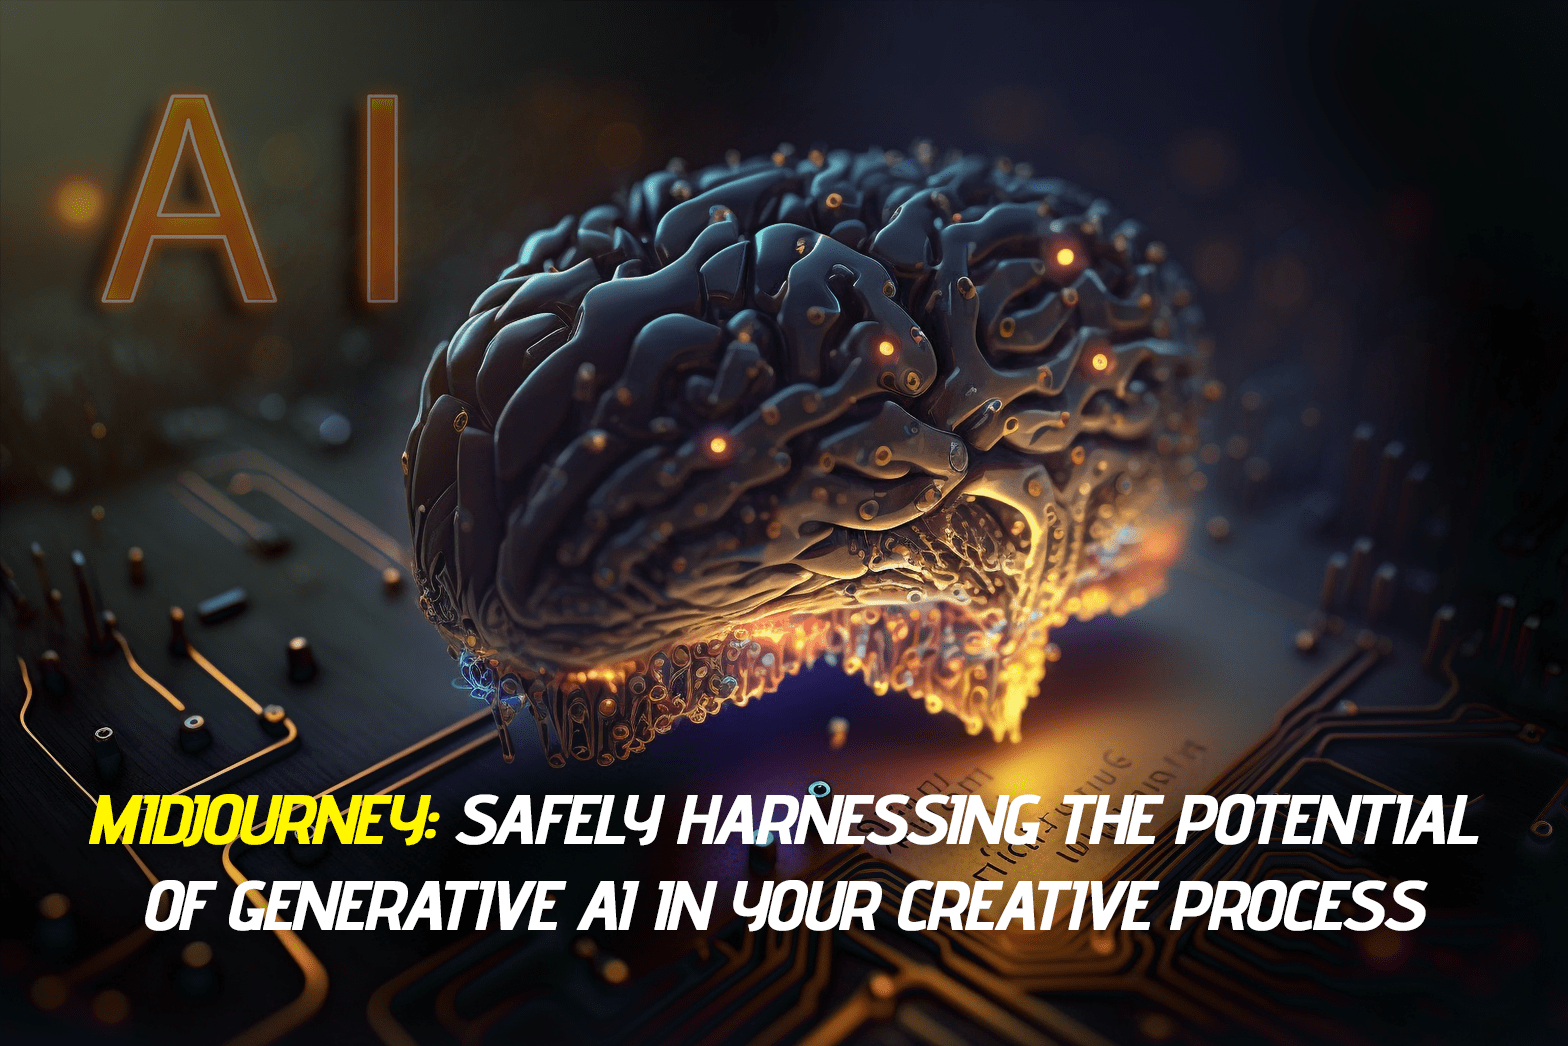 Midjourney: Safely Harnessing the Potential of Generative AI in Your Creative Process